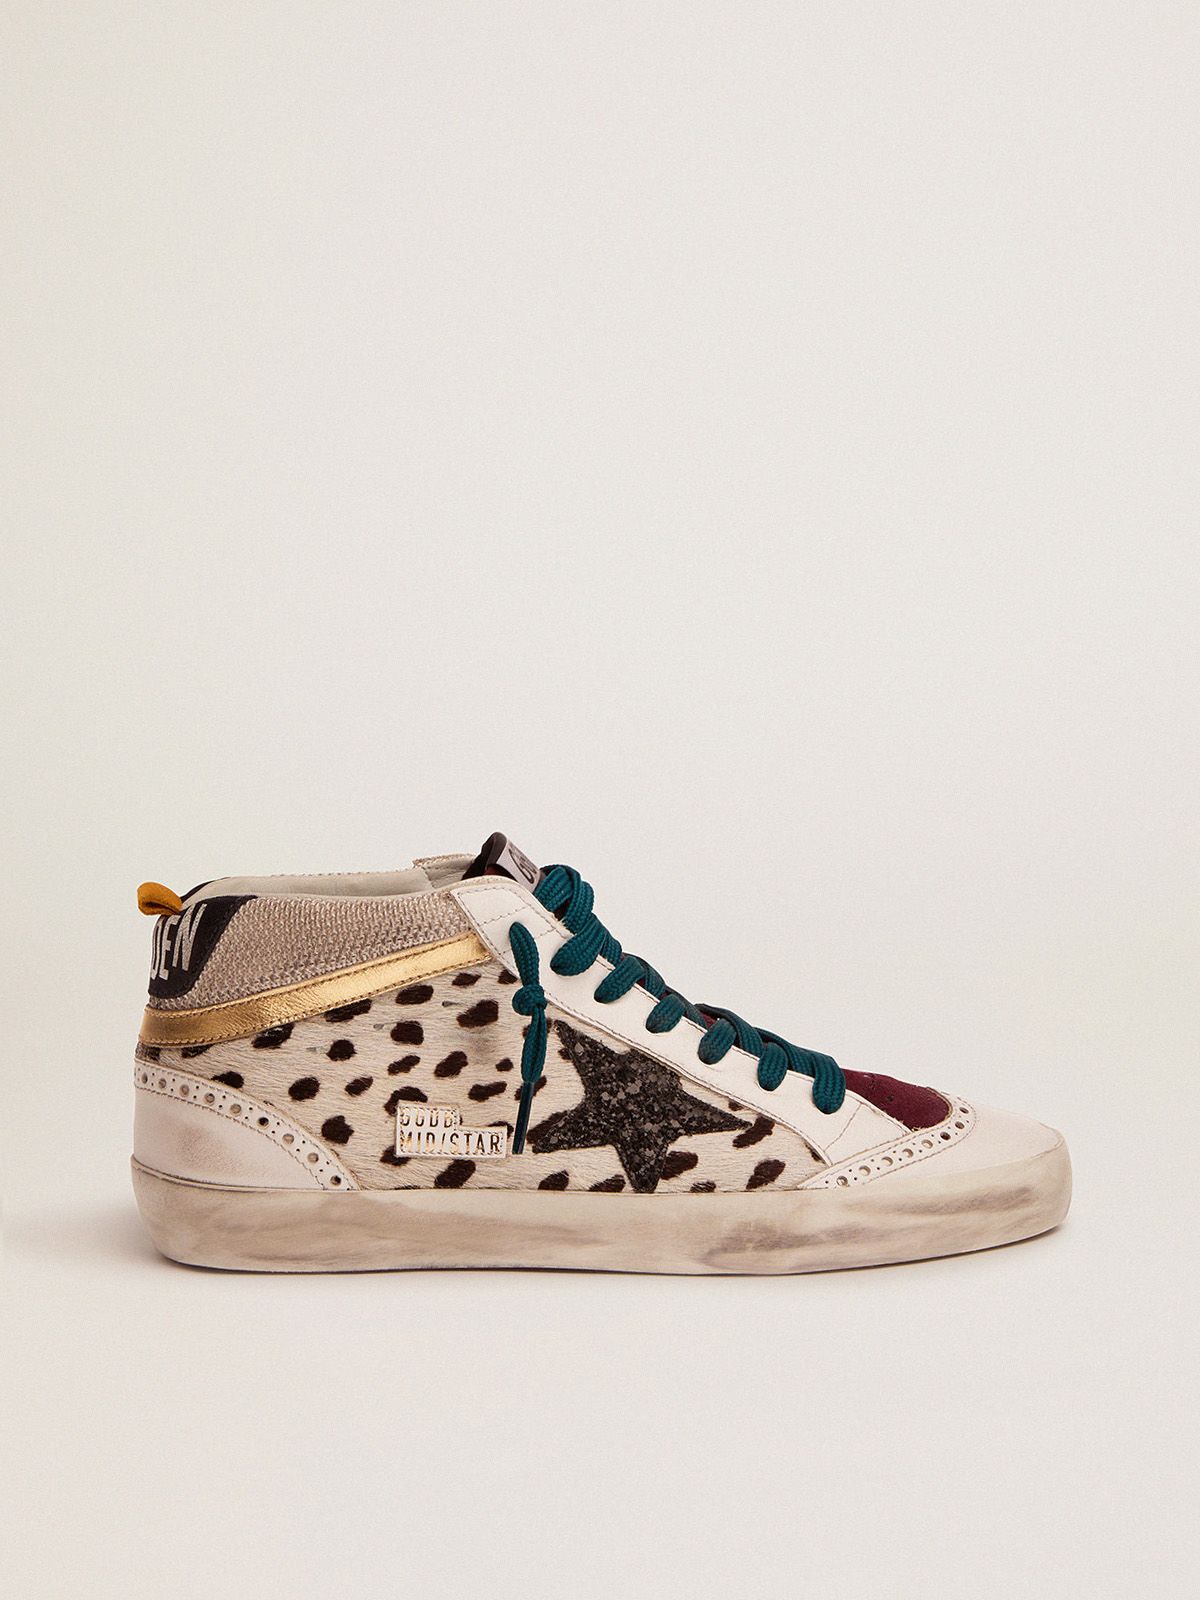 Golden Goose Sneakers Uomo Mid Star sneakers with animal-print pony skin upper and black glitter star